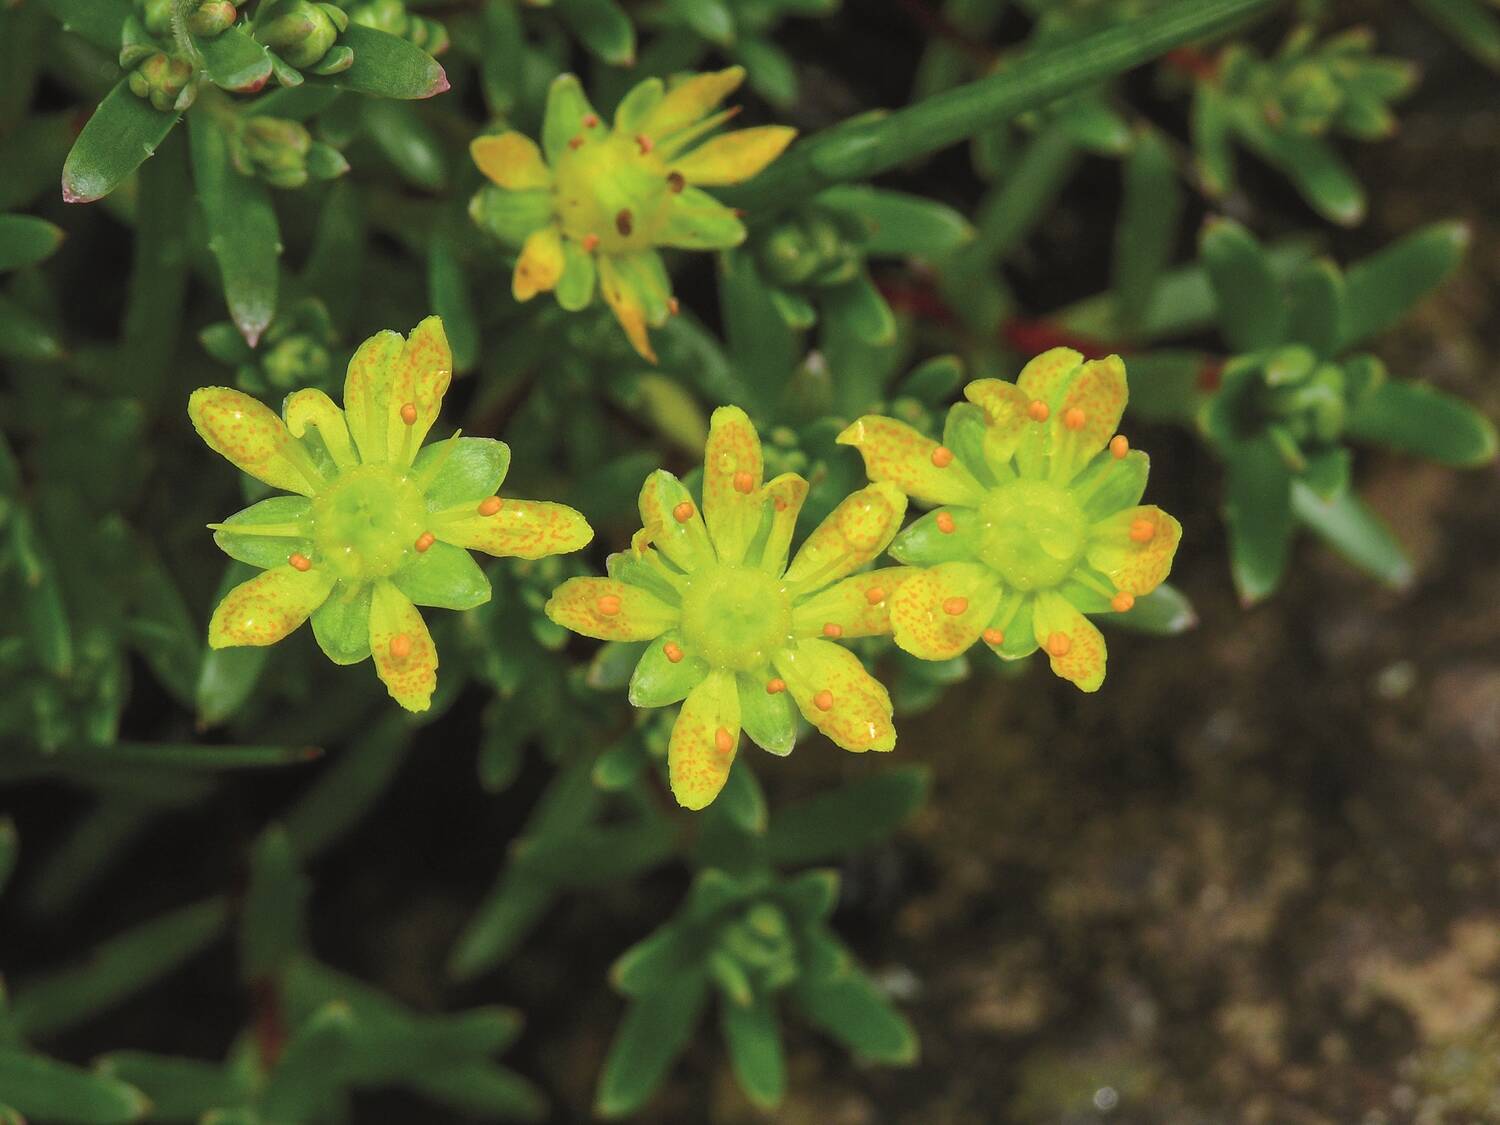 A close-up view of star-shaped little yellow flowers, growing close to the ground. They also have small green waxy-looking leaves.